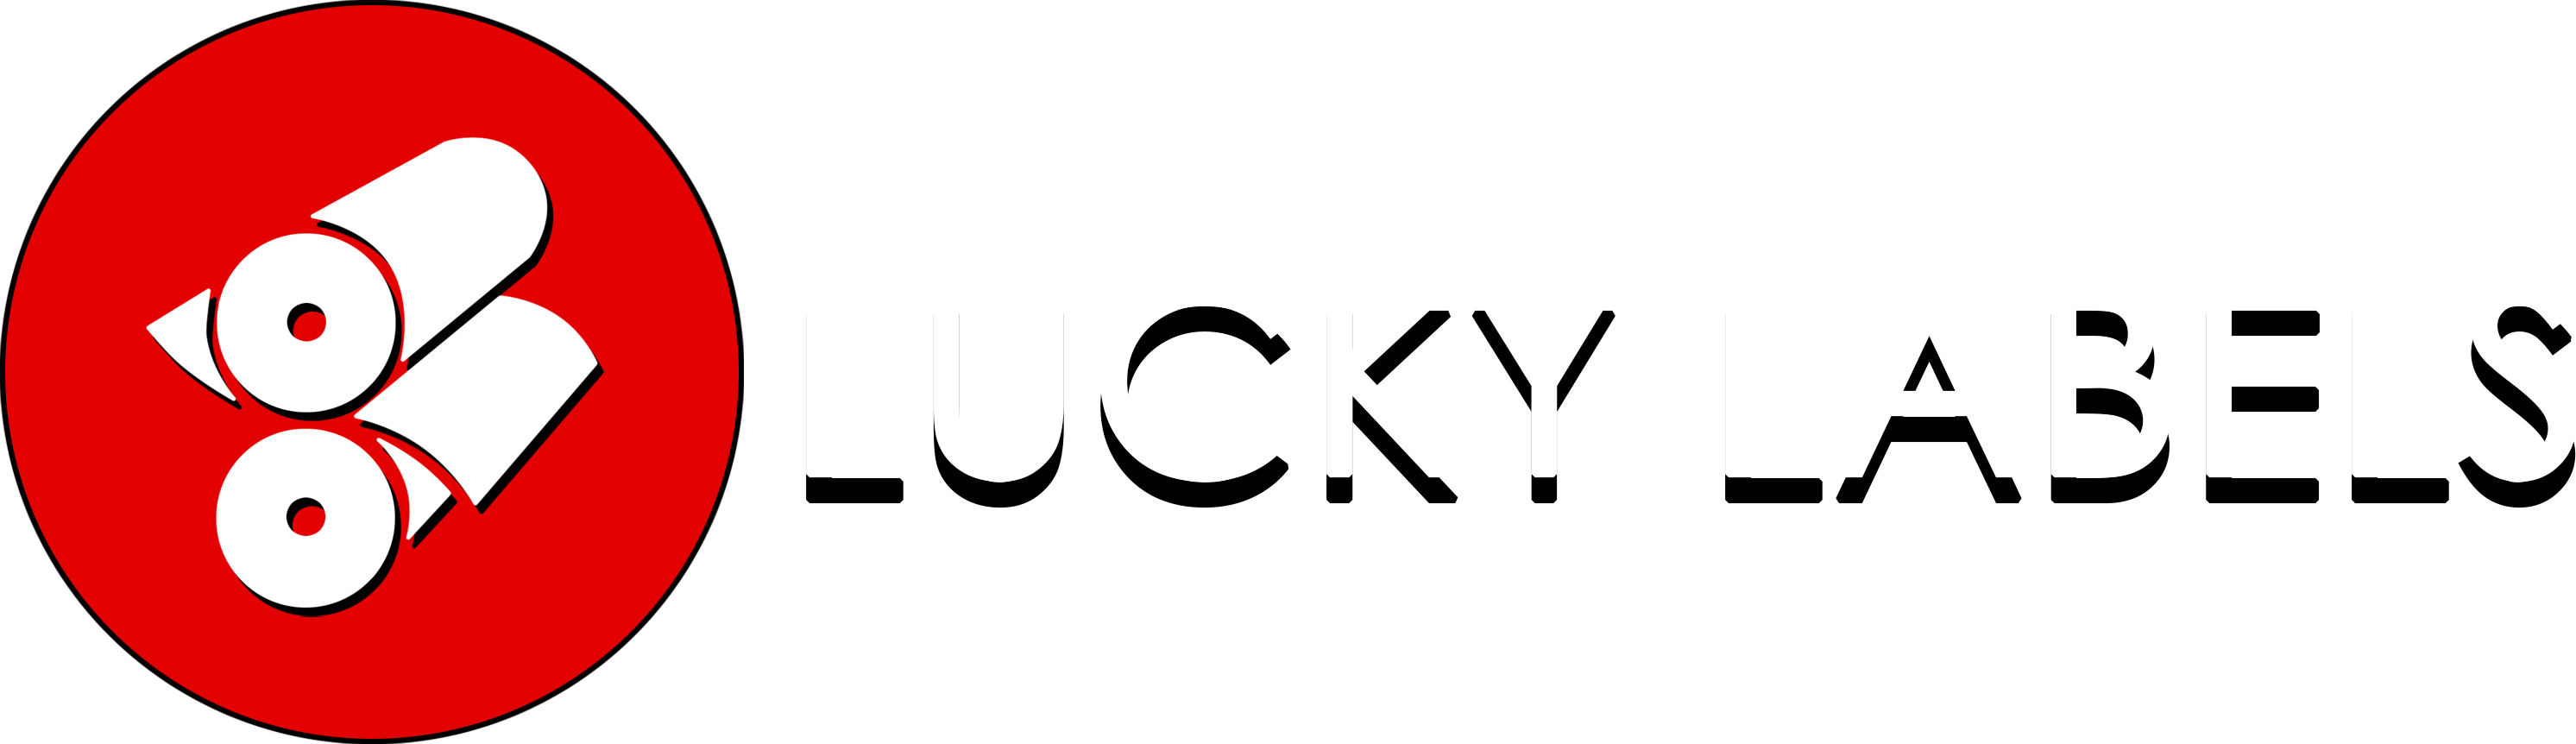 Lucky-Labels